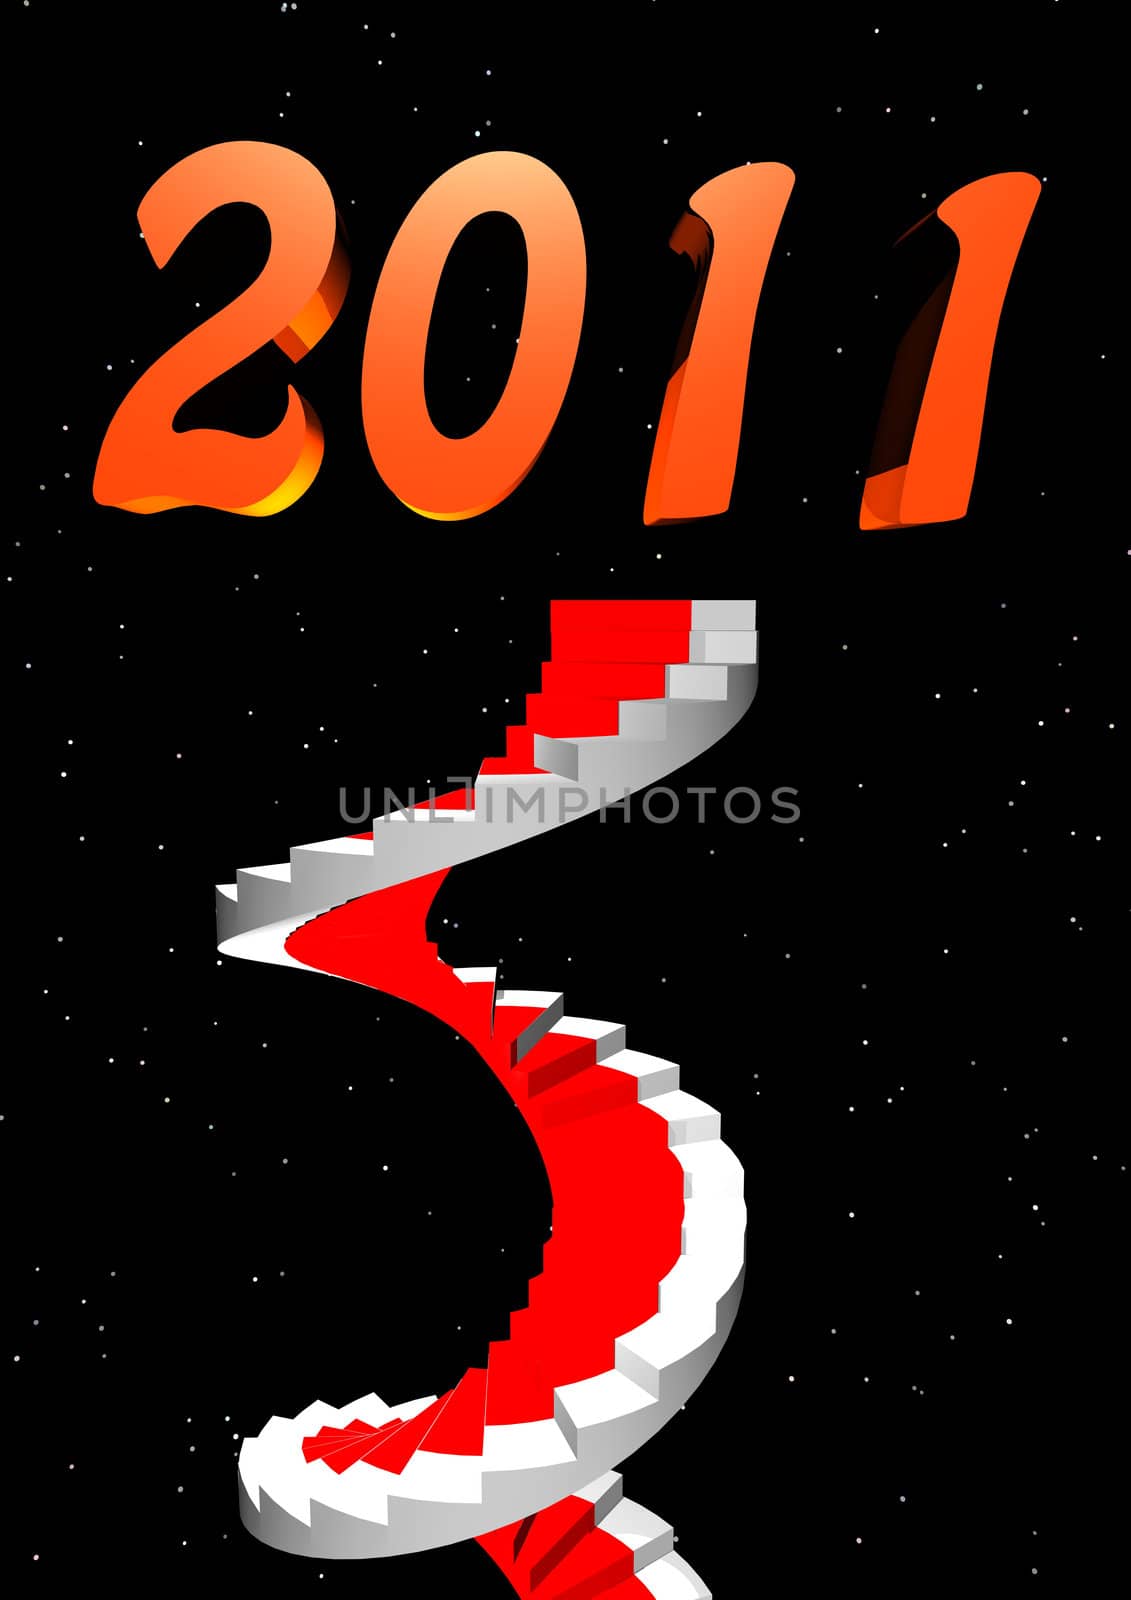 Red and white stairs going to 2011 by starry night